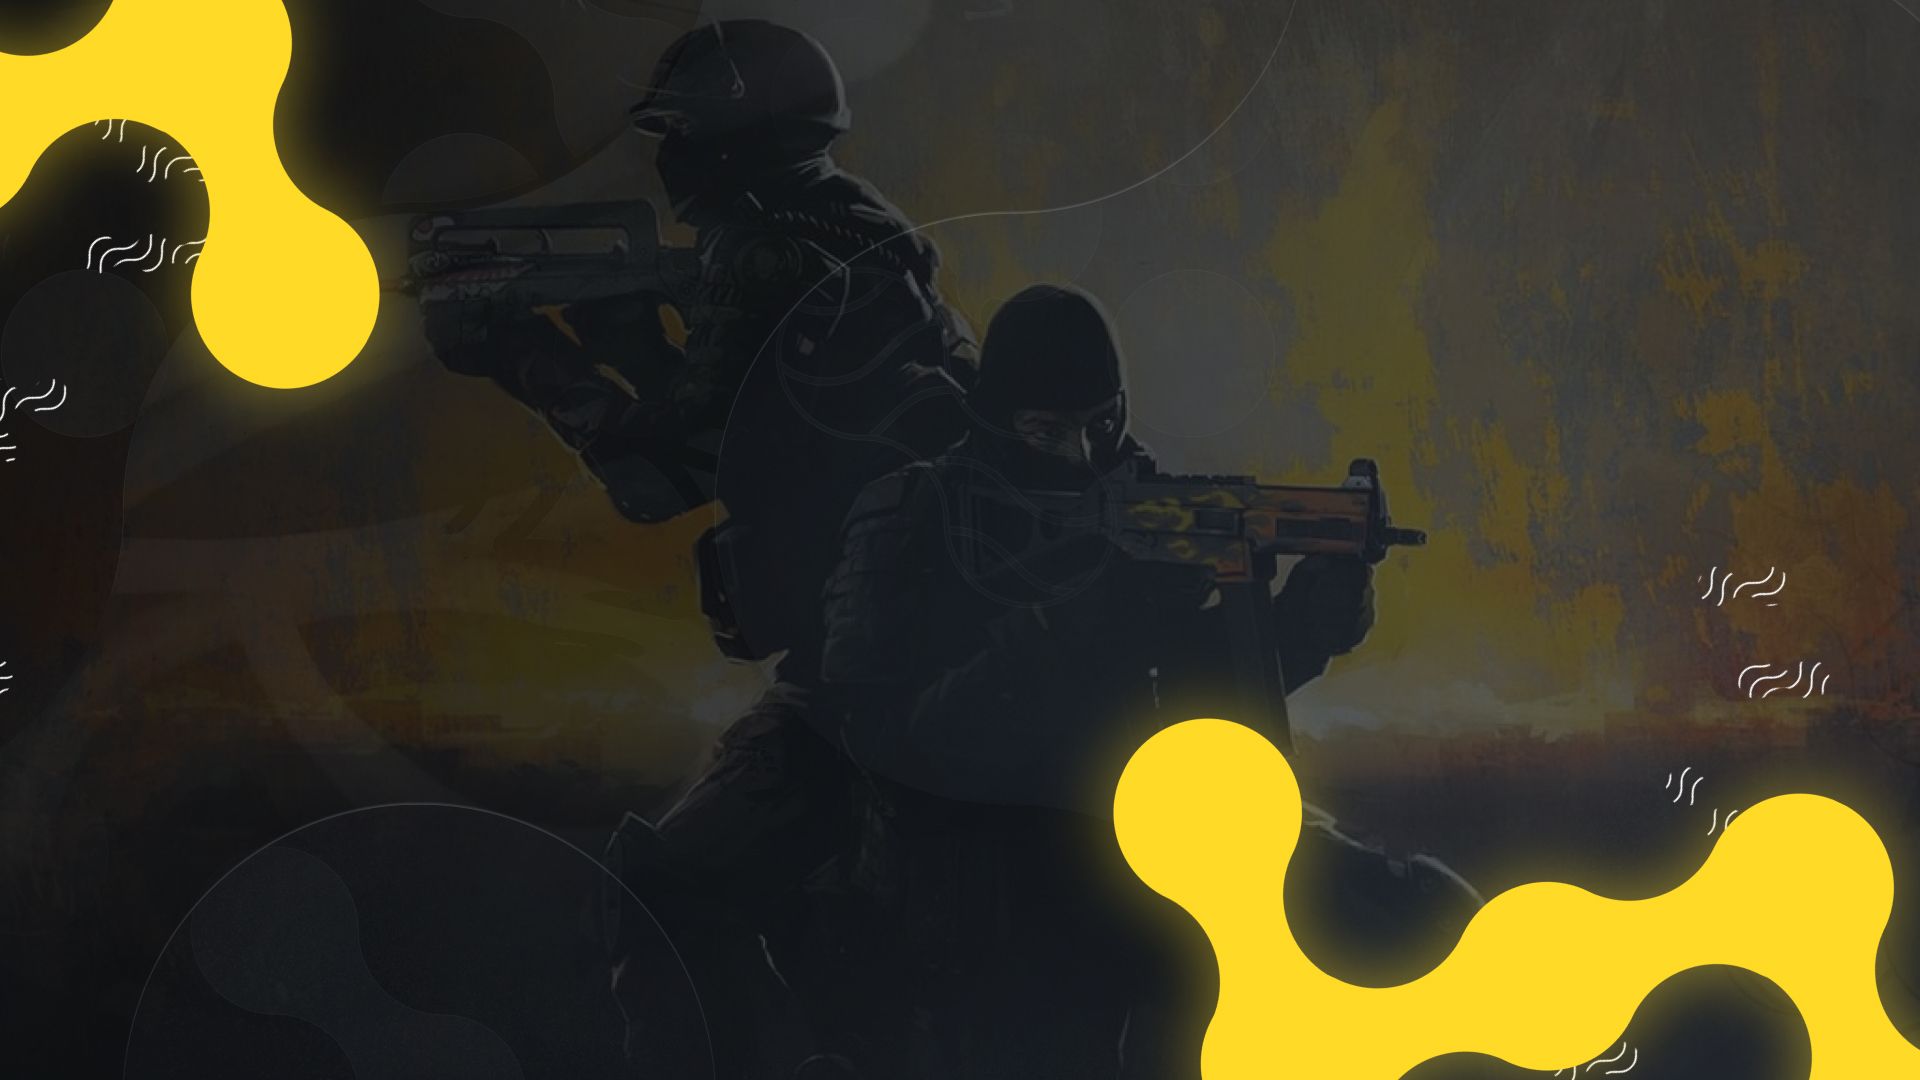 Counter Strike 2 Overview Changes Major Shifts